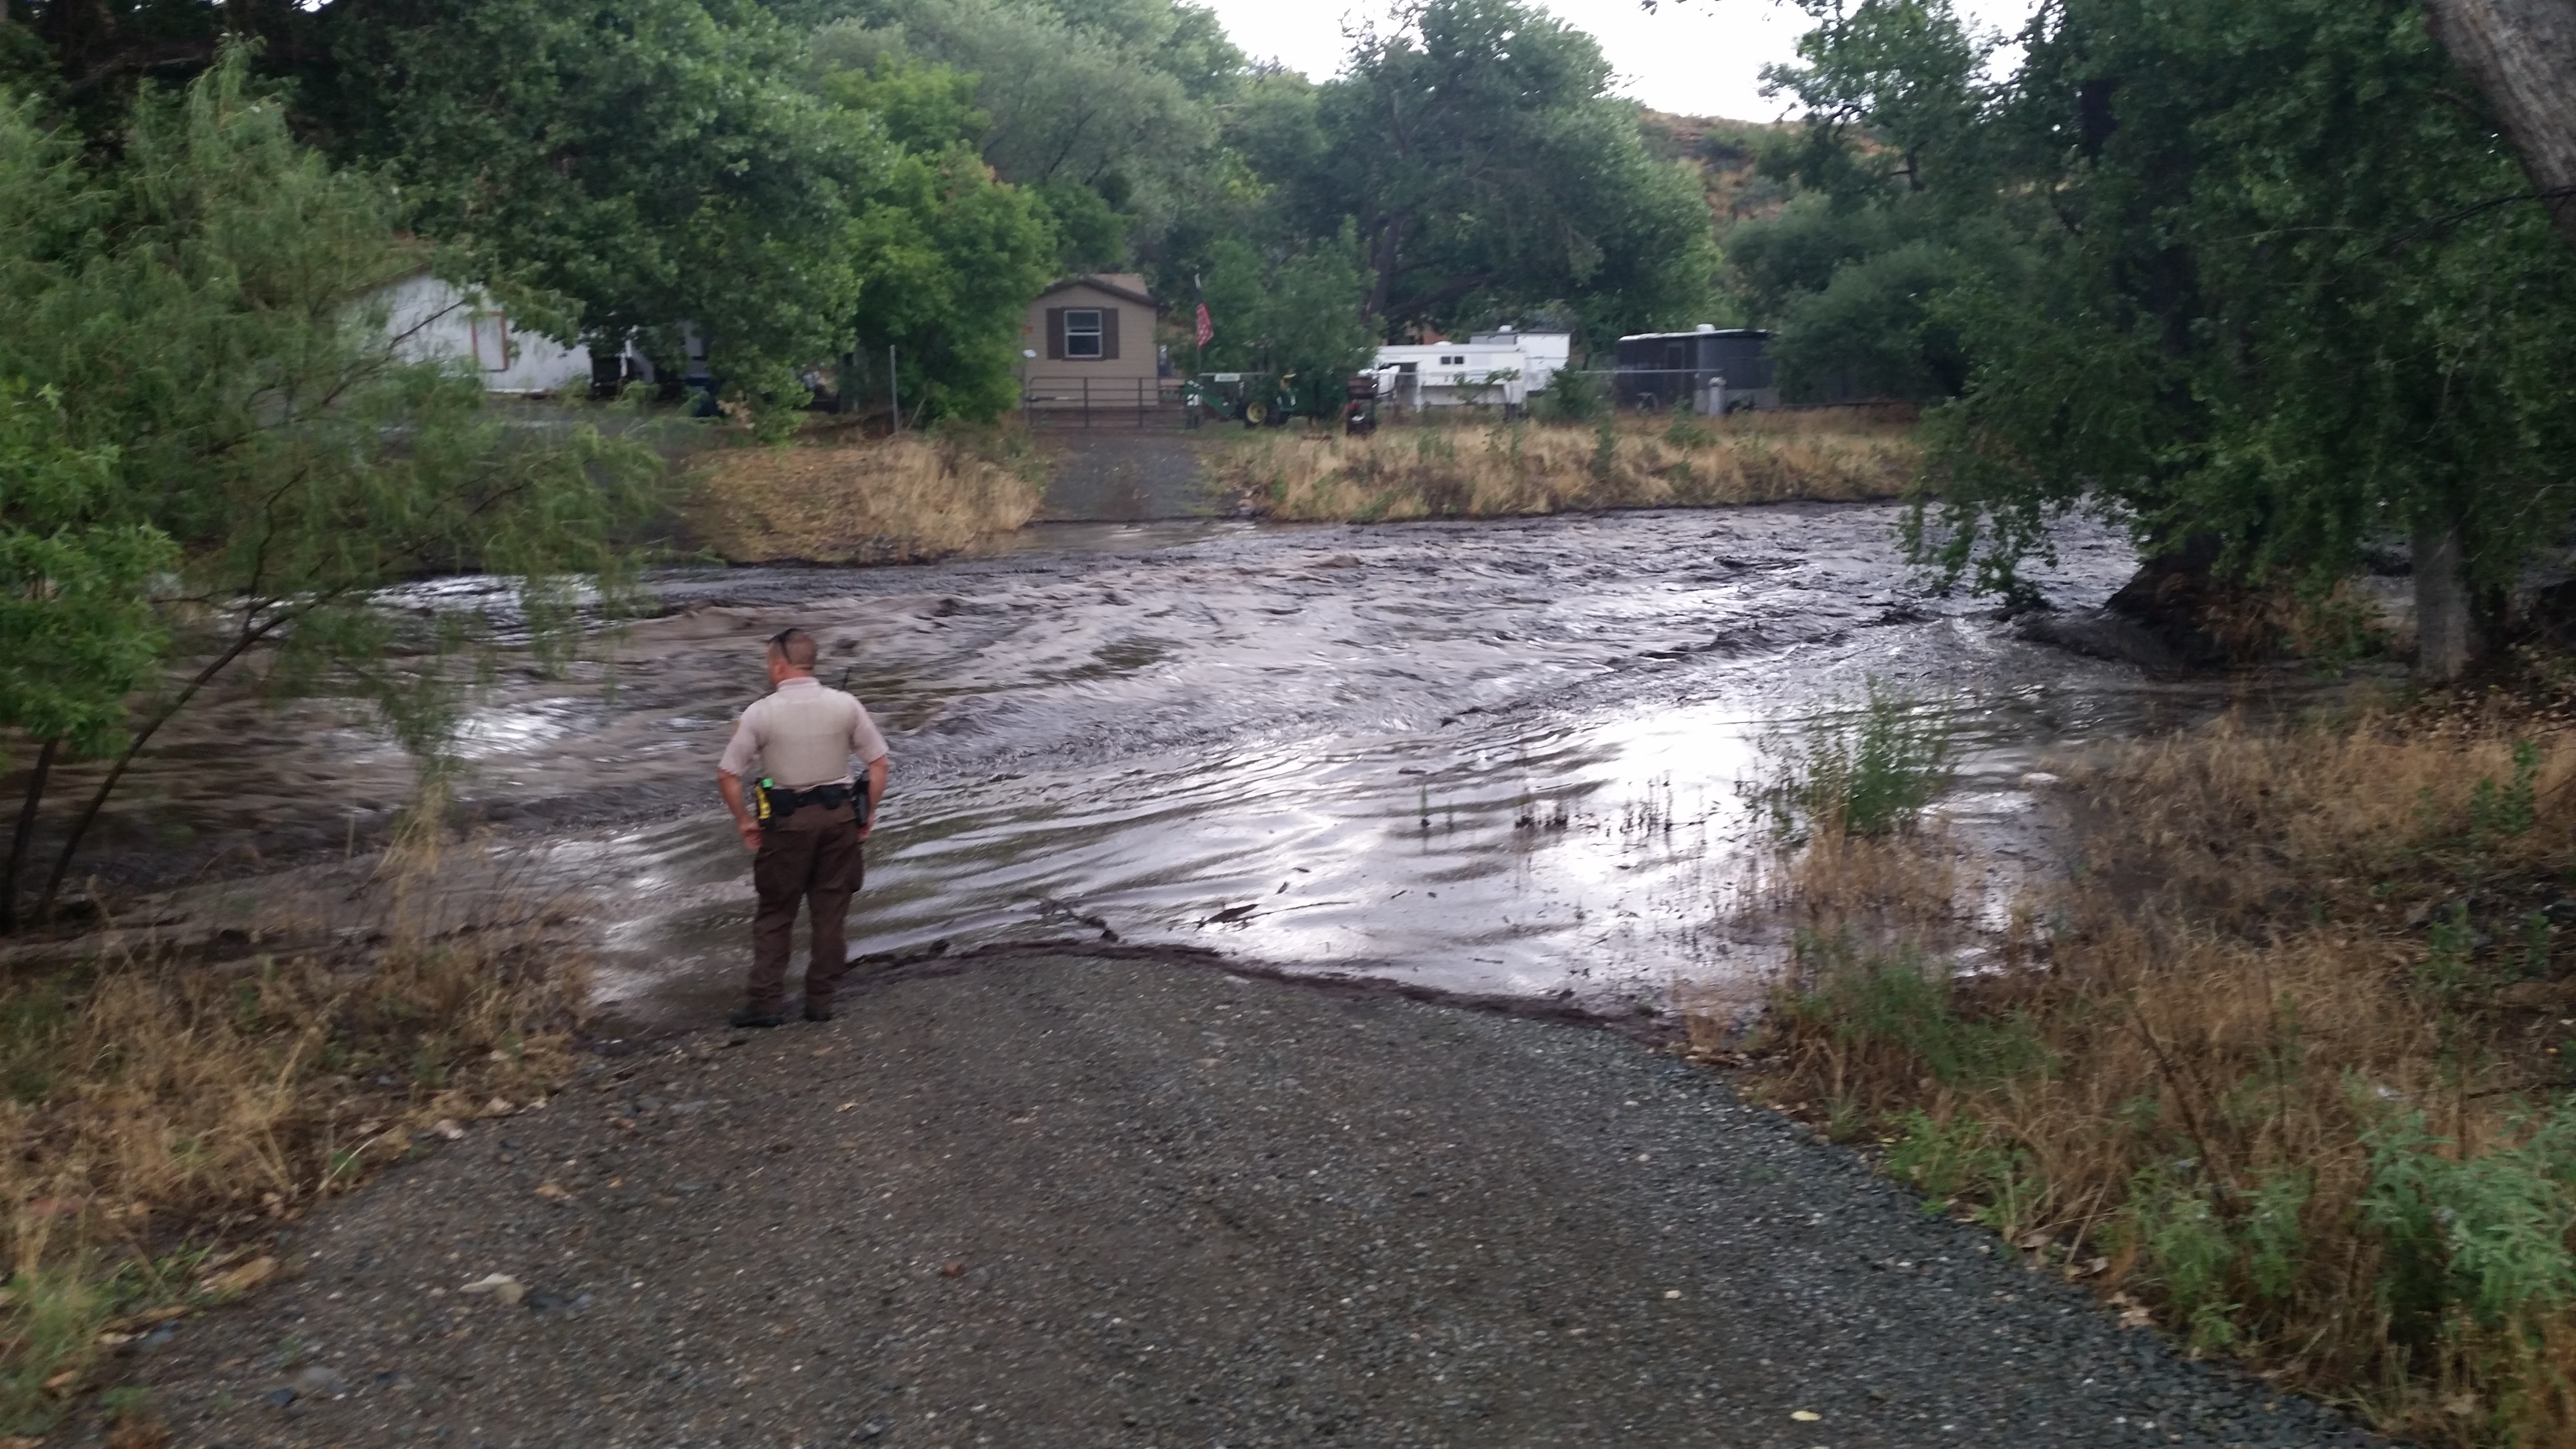 Law enforcement officer looks on at the flooding taking place along Central Avenue in Mayer, AZ as Big Bug Creek was overflowing the creek banks.